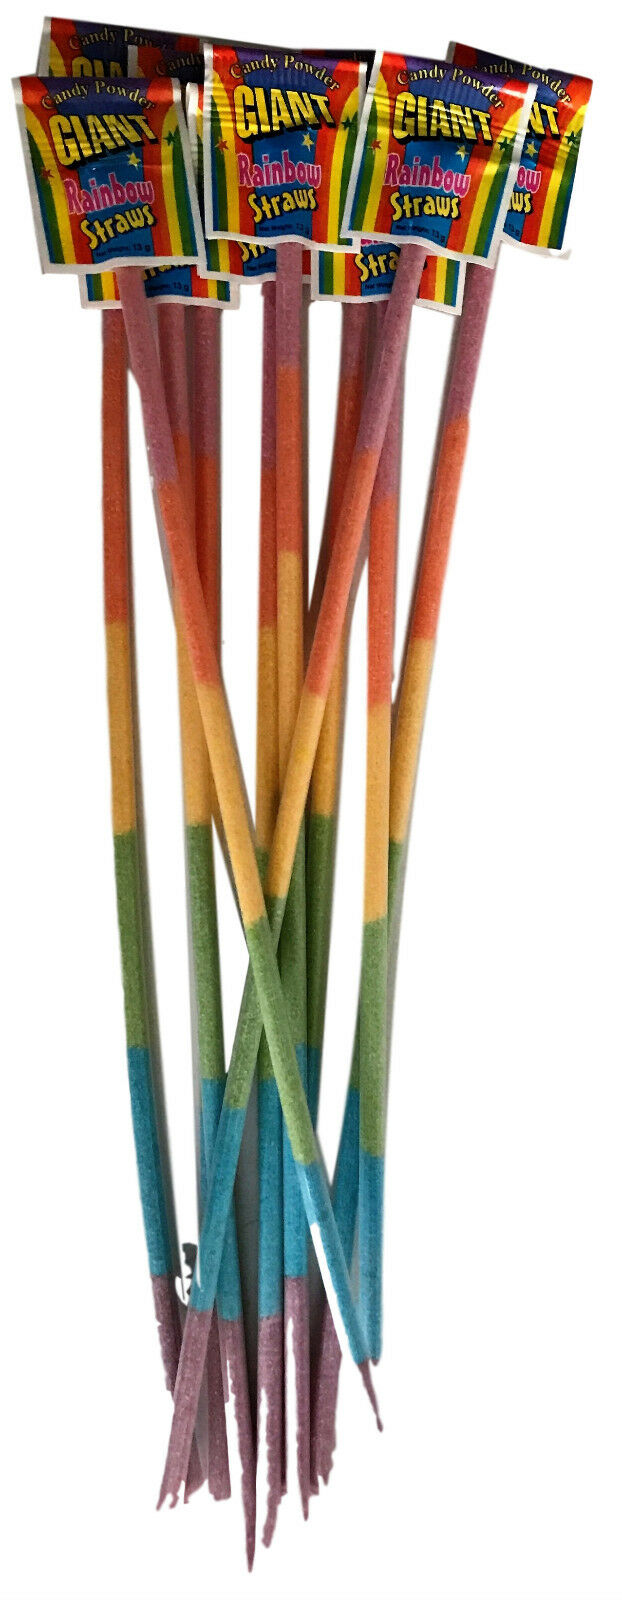 Christmas Party Favors Happy Holiday Straw Winter Party 